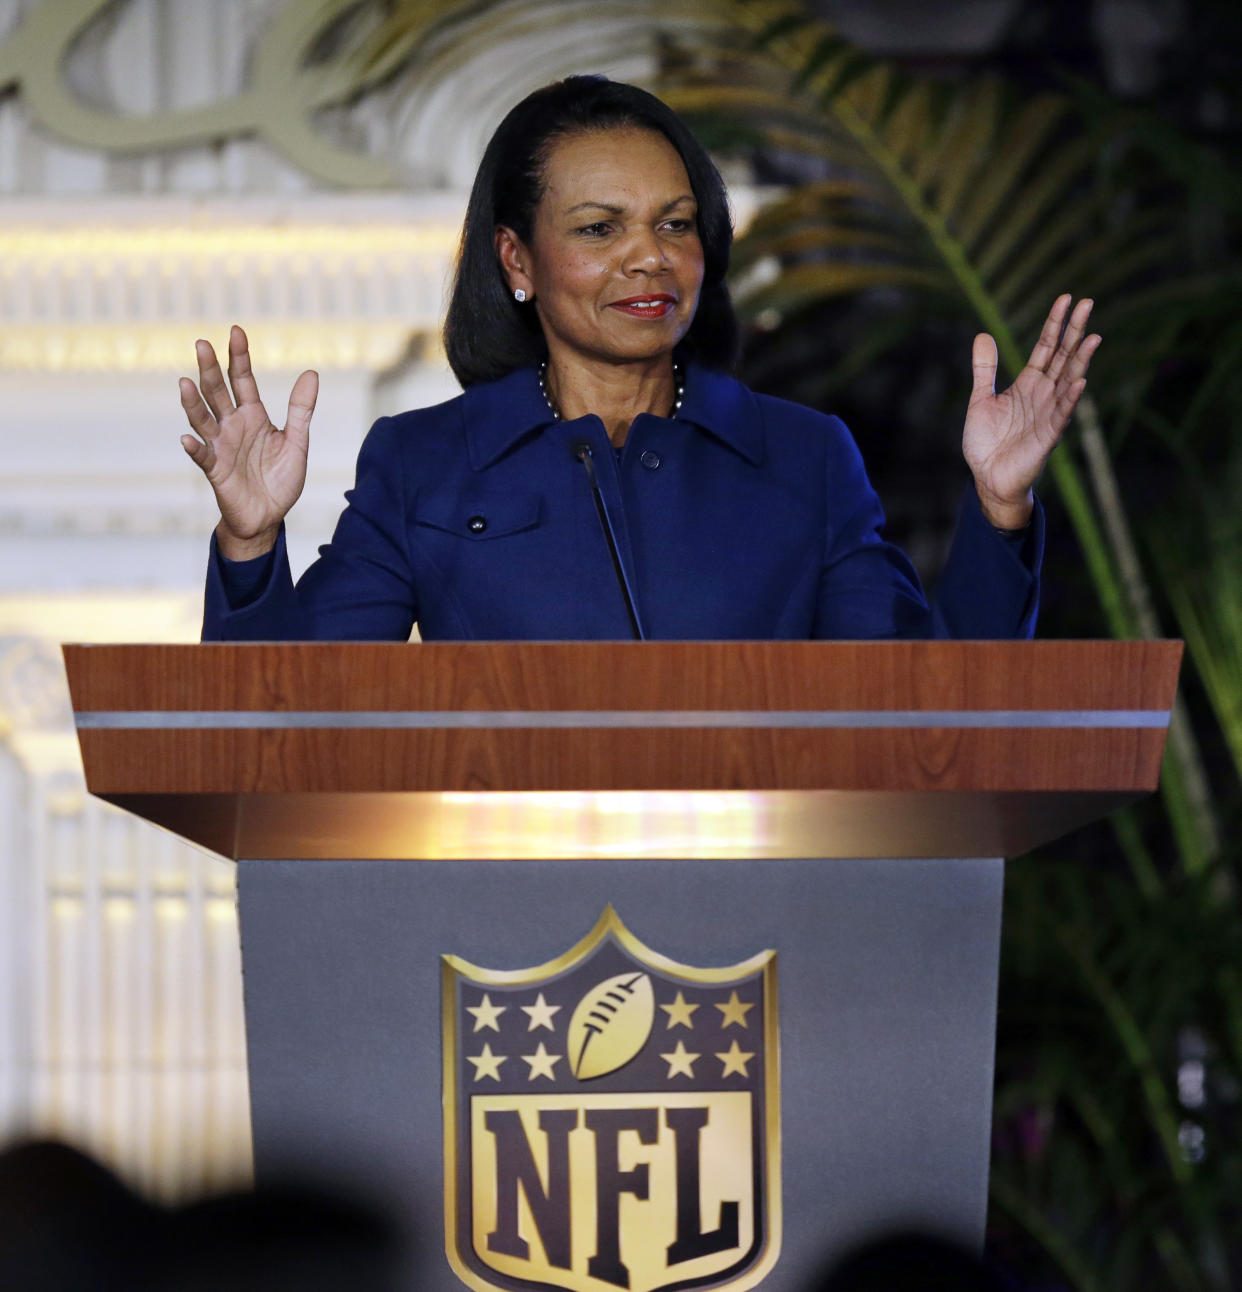 The Cleveland Browns reportedly want to interview Condoleezza Rice for their head coach opening. (AP)